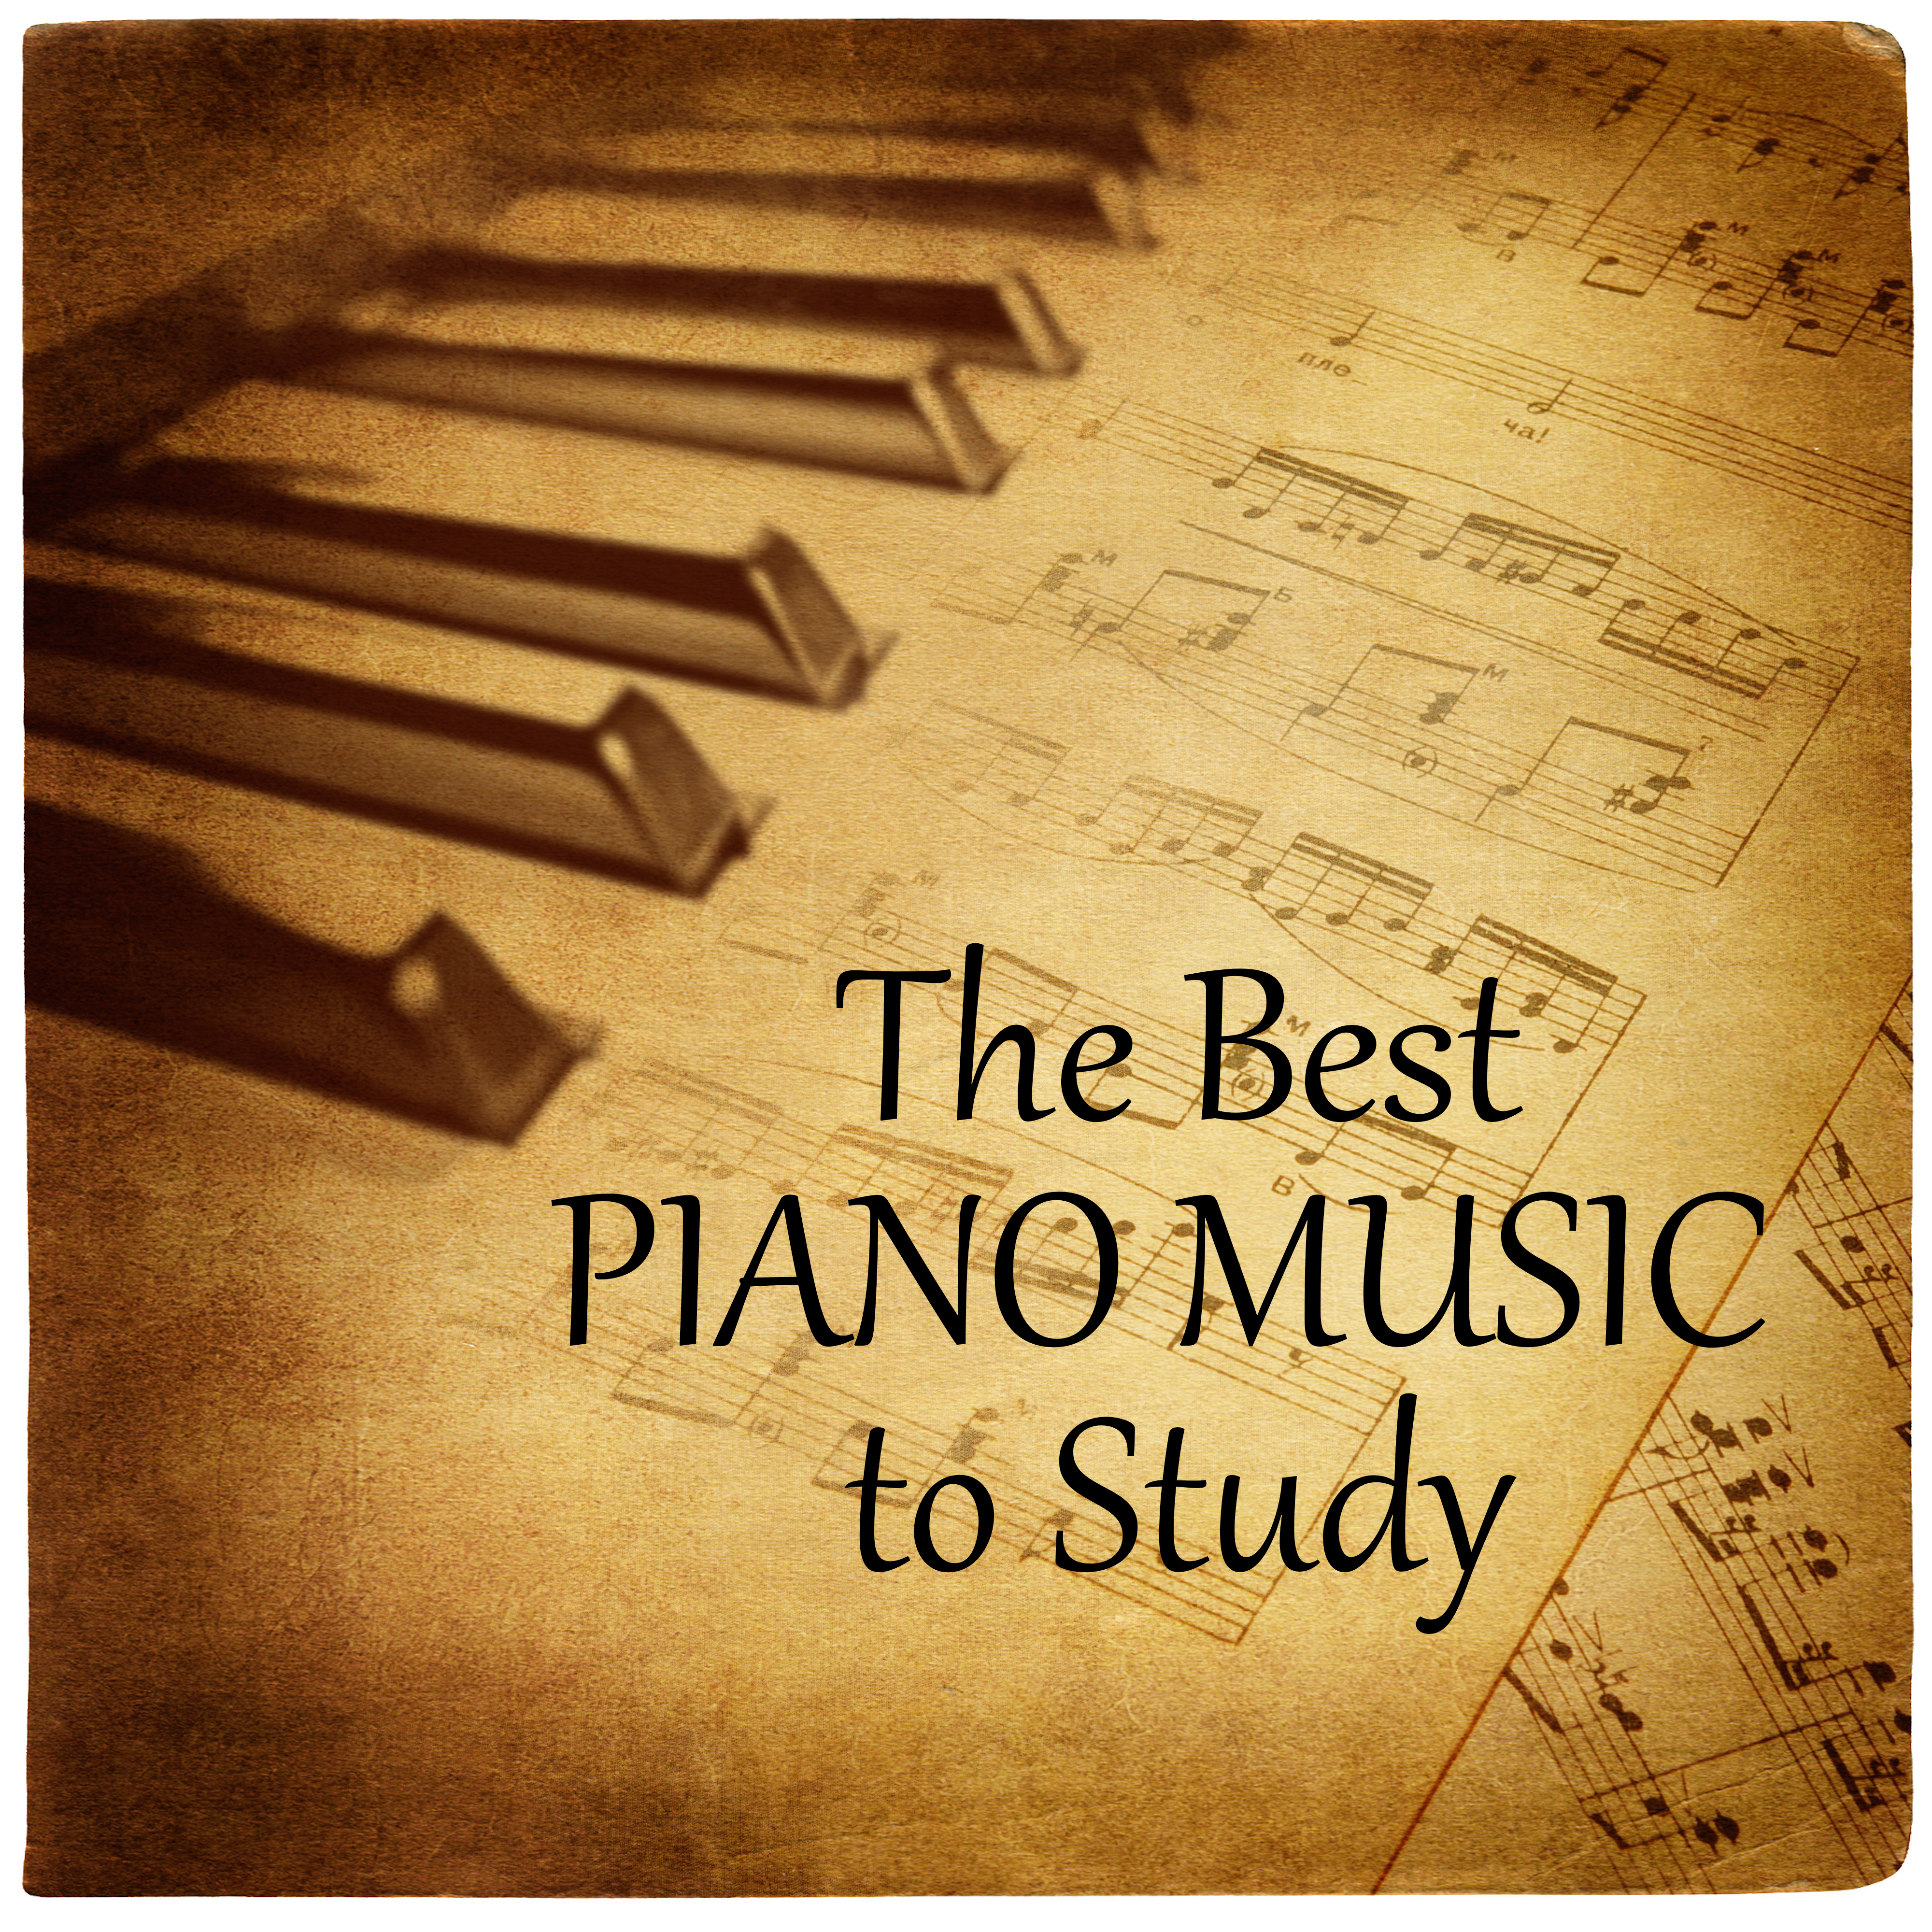 The Best Piano Music to Study - Relaxing Instrumental Music for Concentration and Study